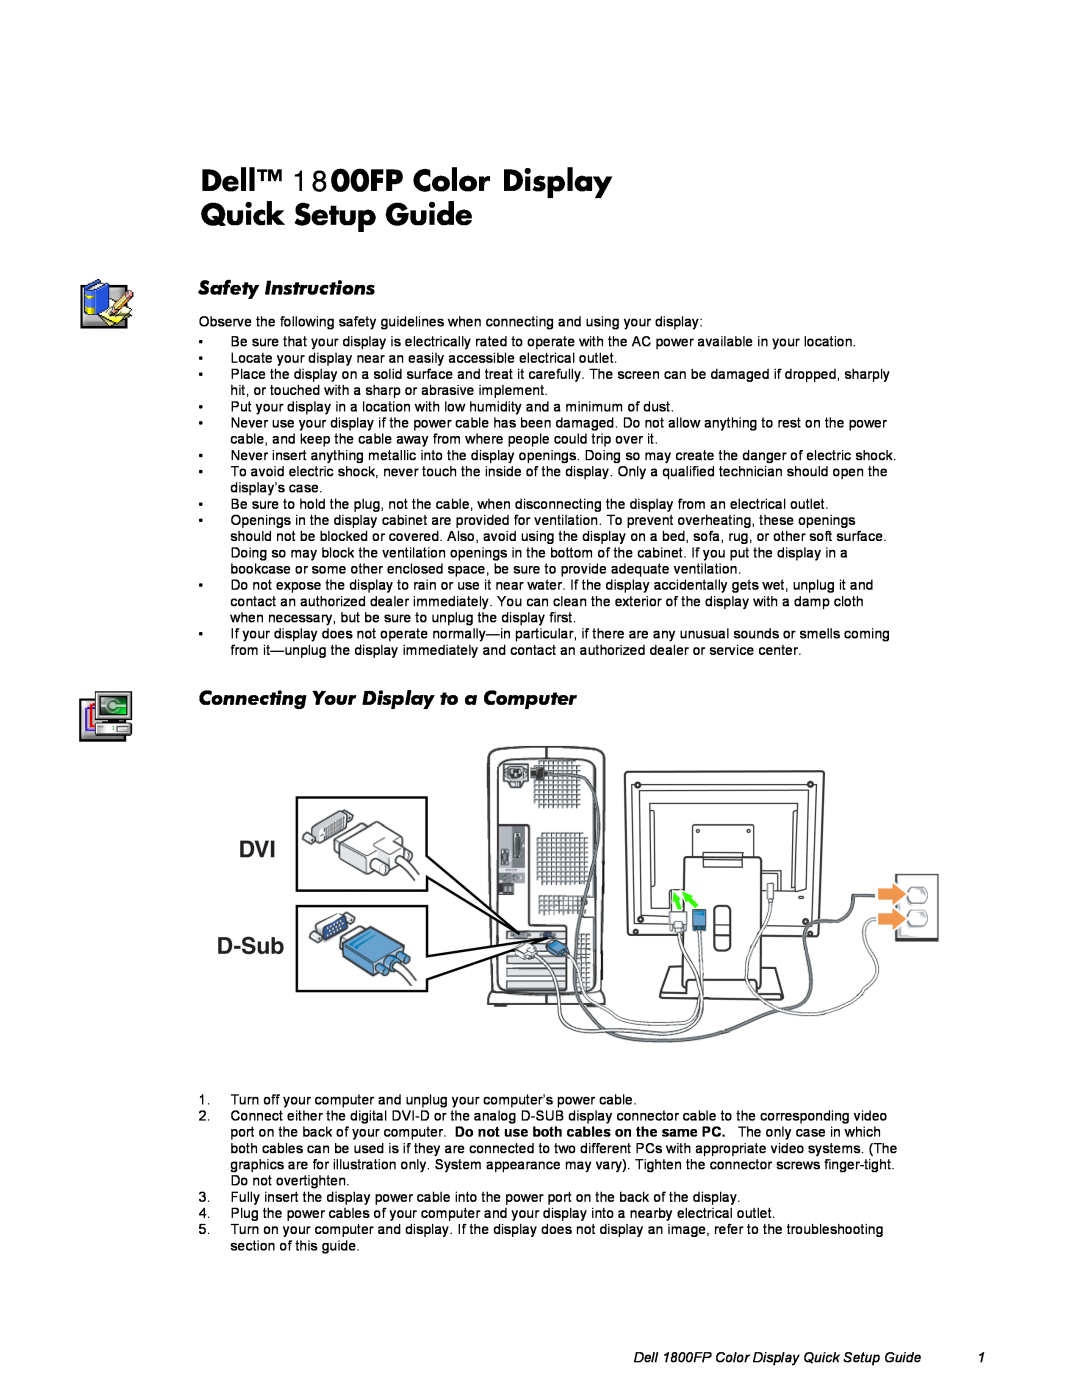 Dell 1800FP setup guide Safety Instructions, Connecting Your Display to a Computer 